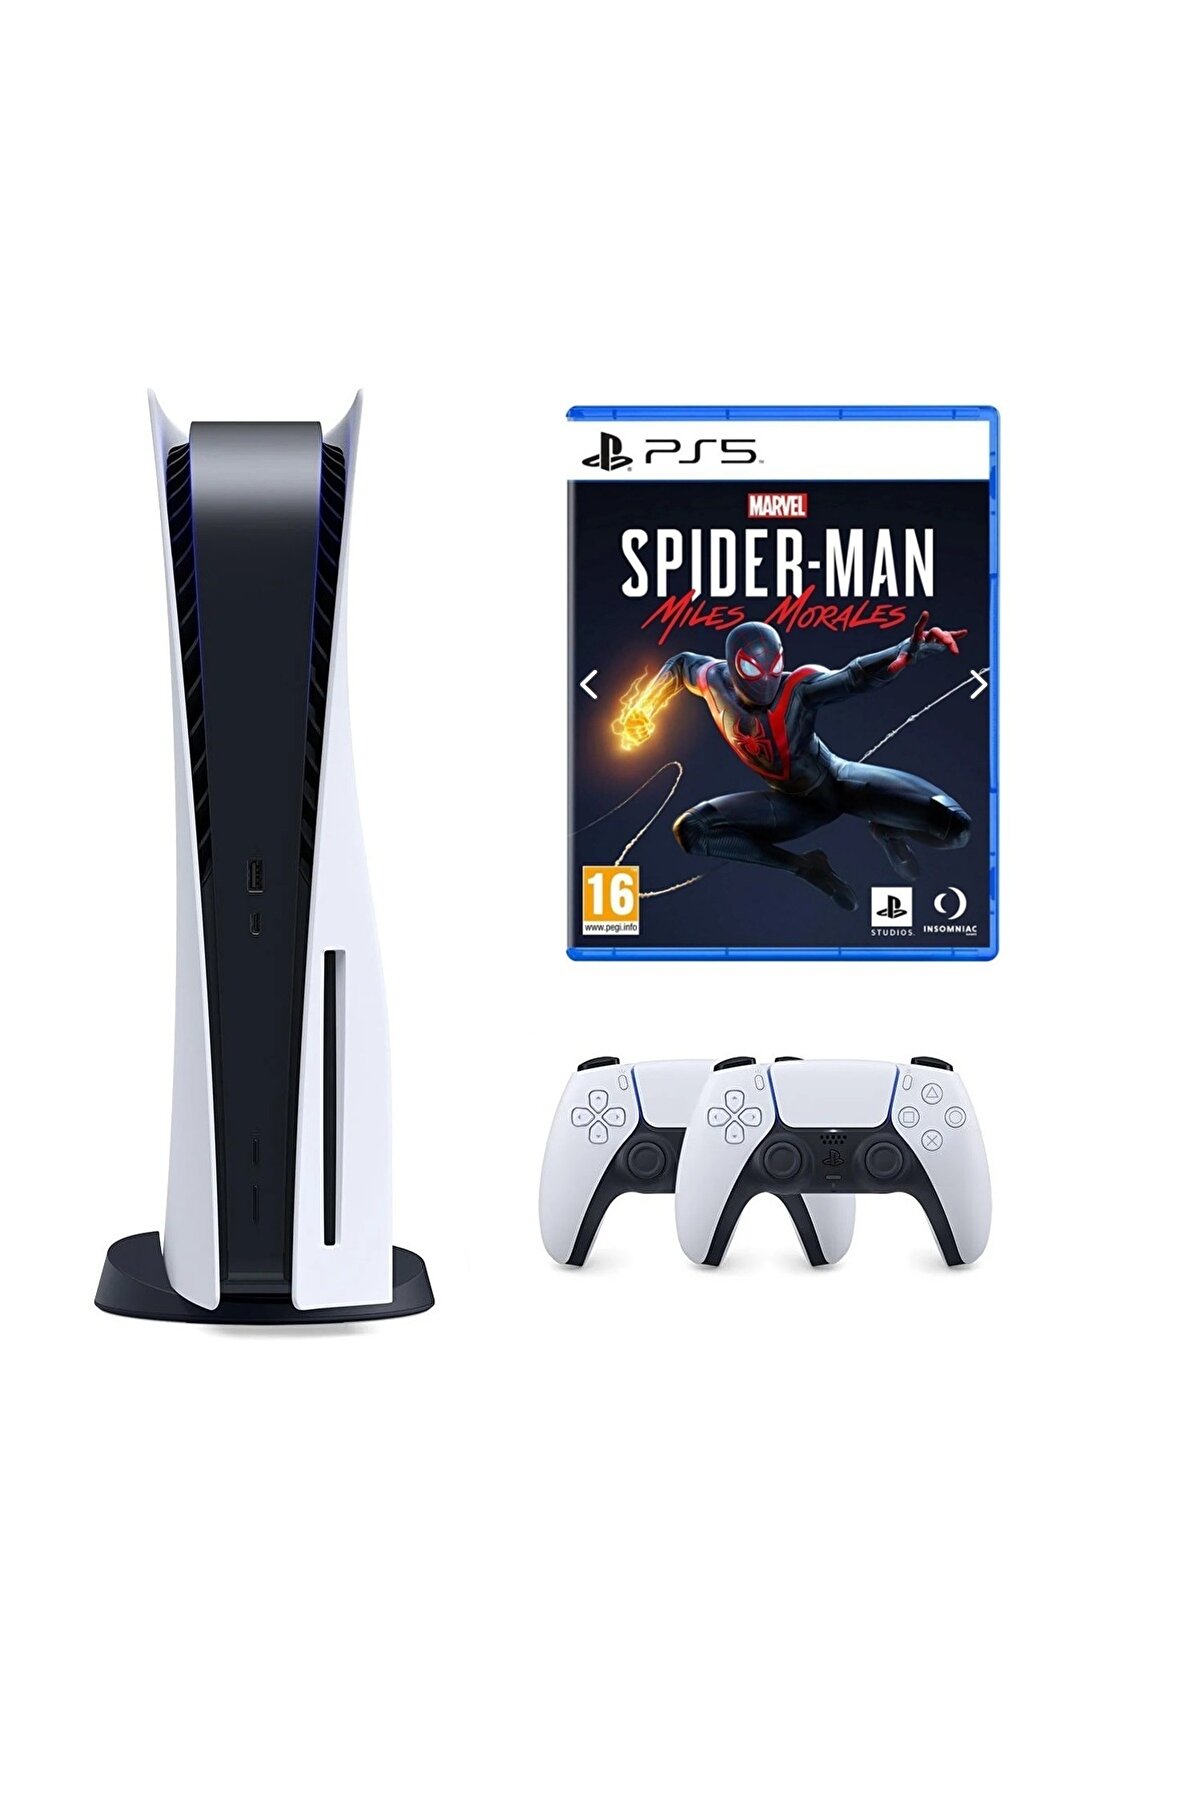 Sony Playstation 5 825 GB + 2. PS5 DualSense + PS5 Marvel's Spider-Man: Miles Morales